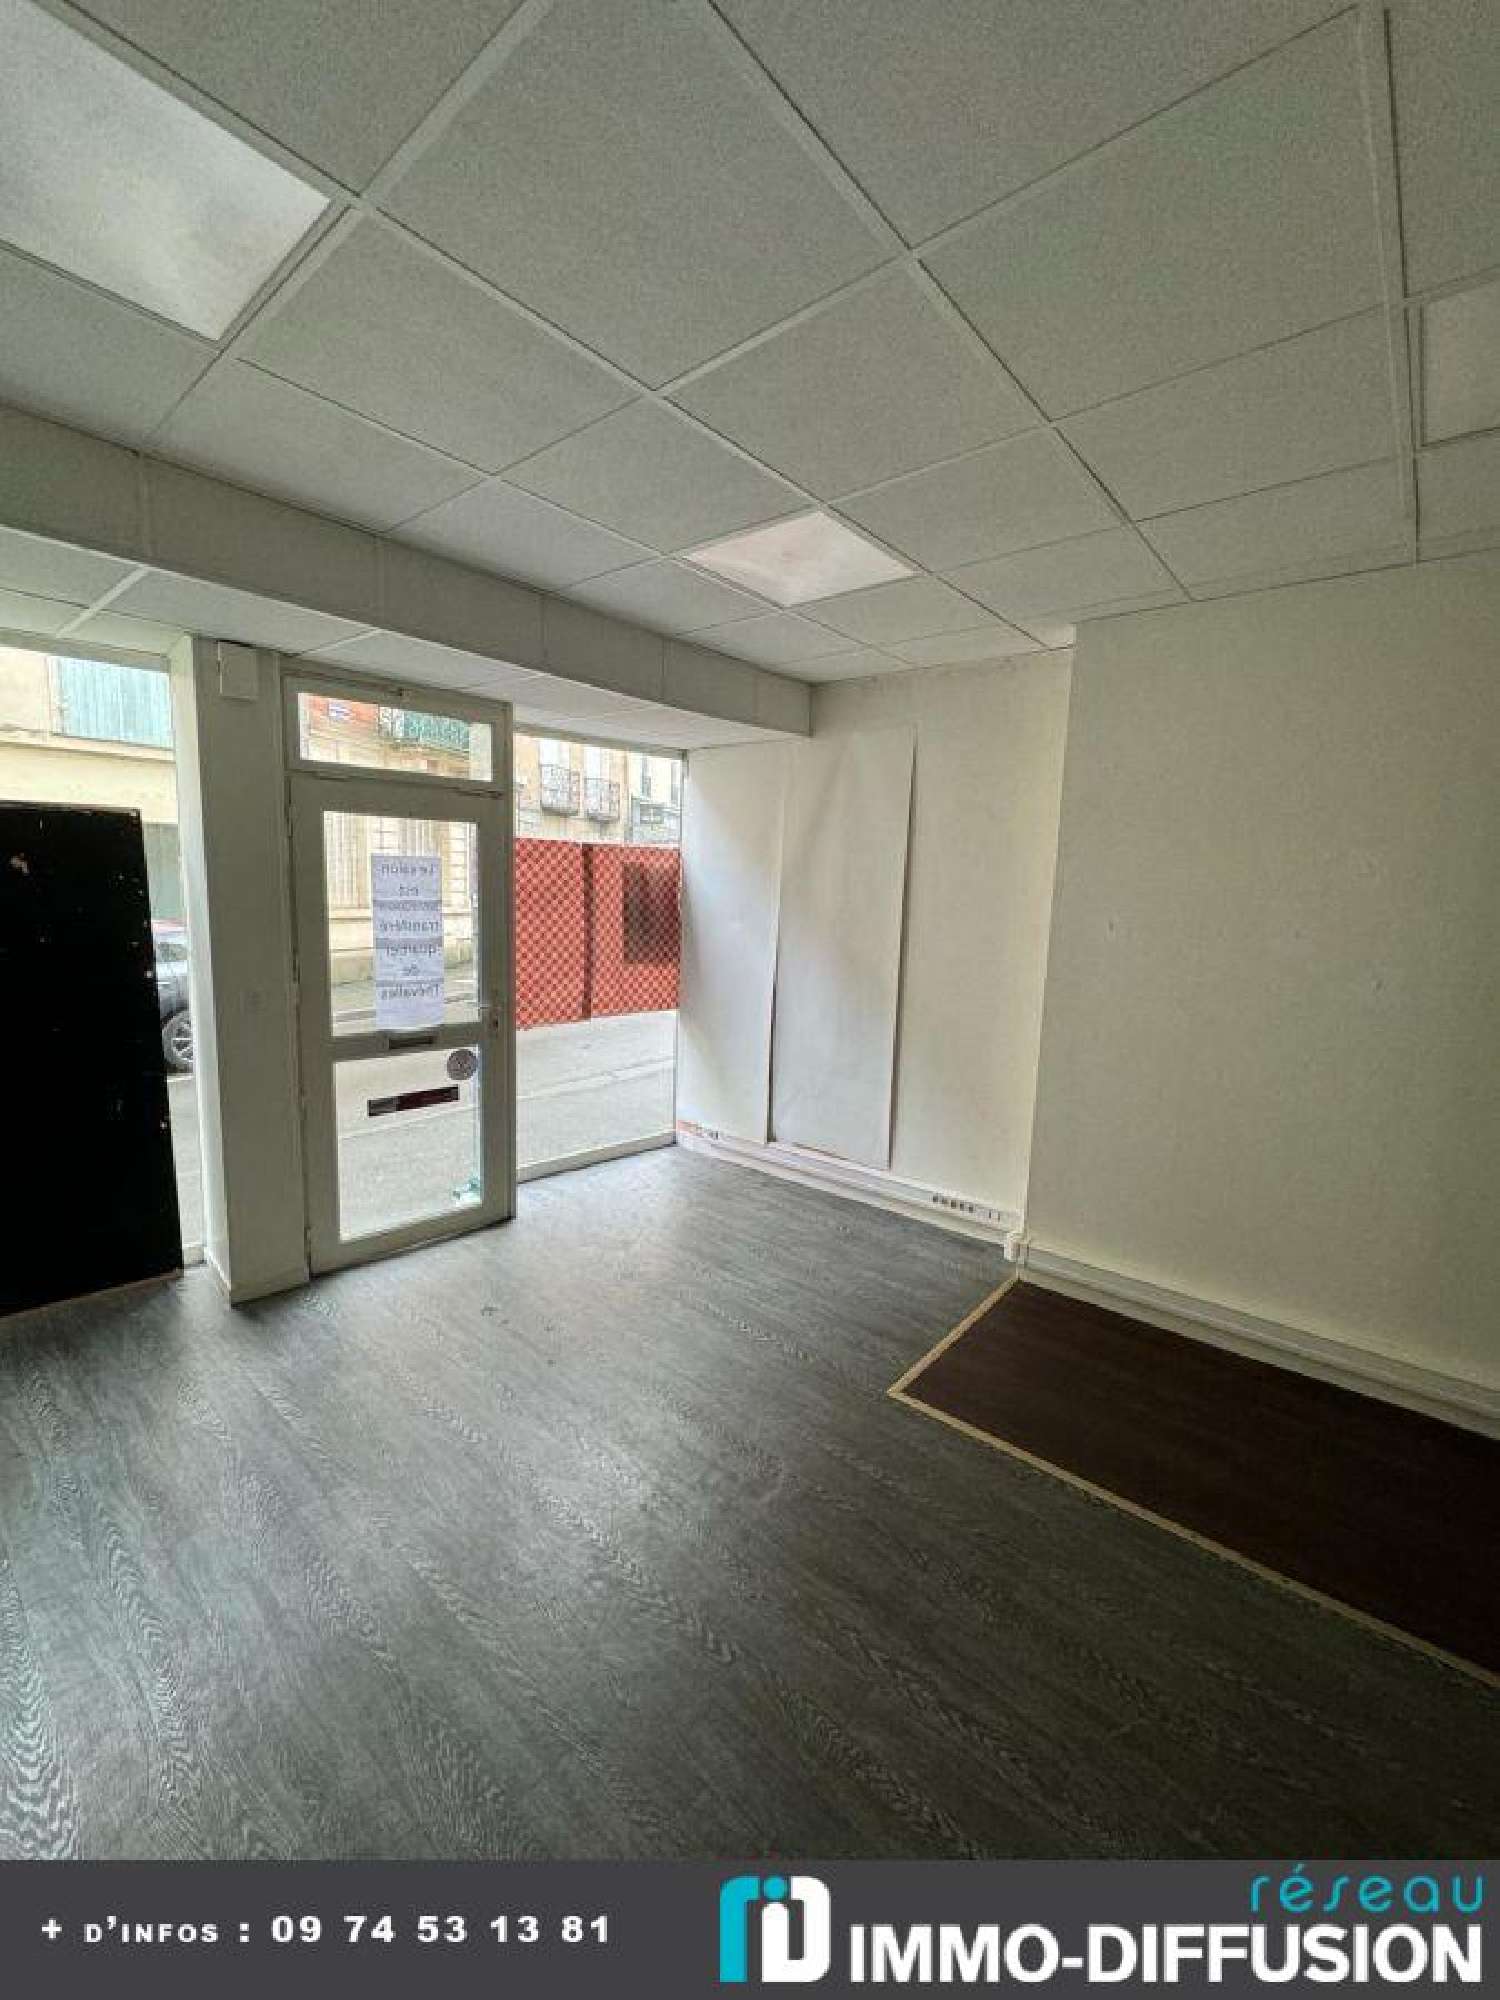  for sale commercial Laval Mayenne 1